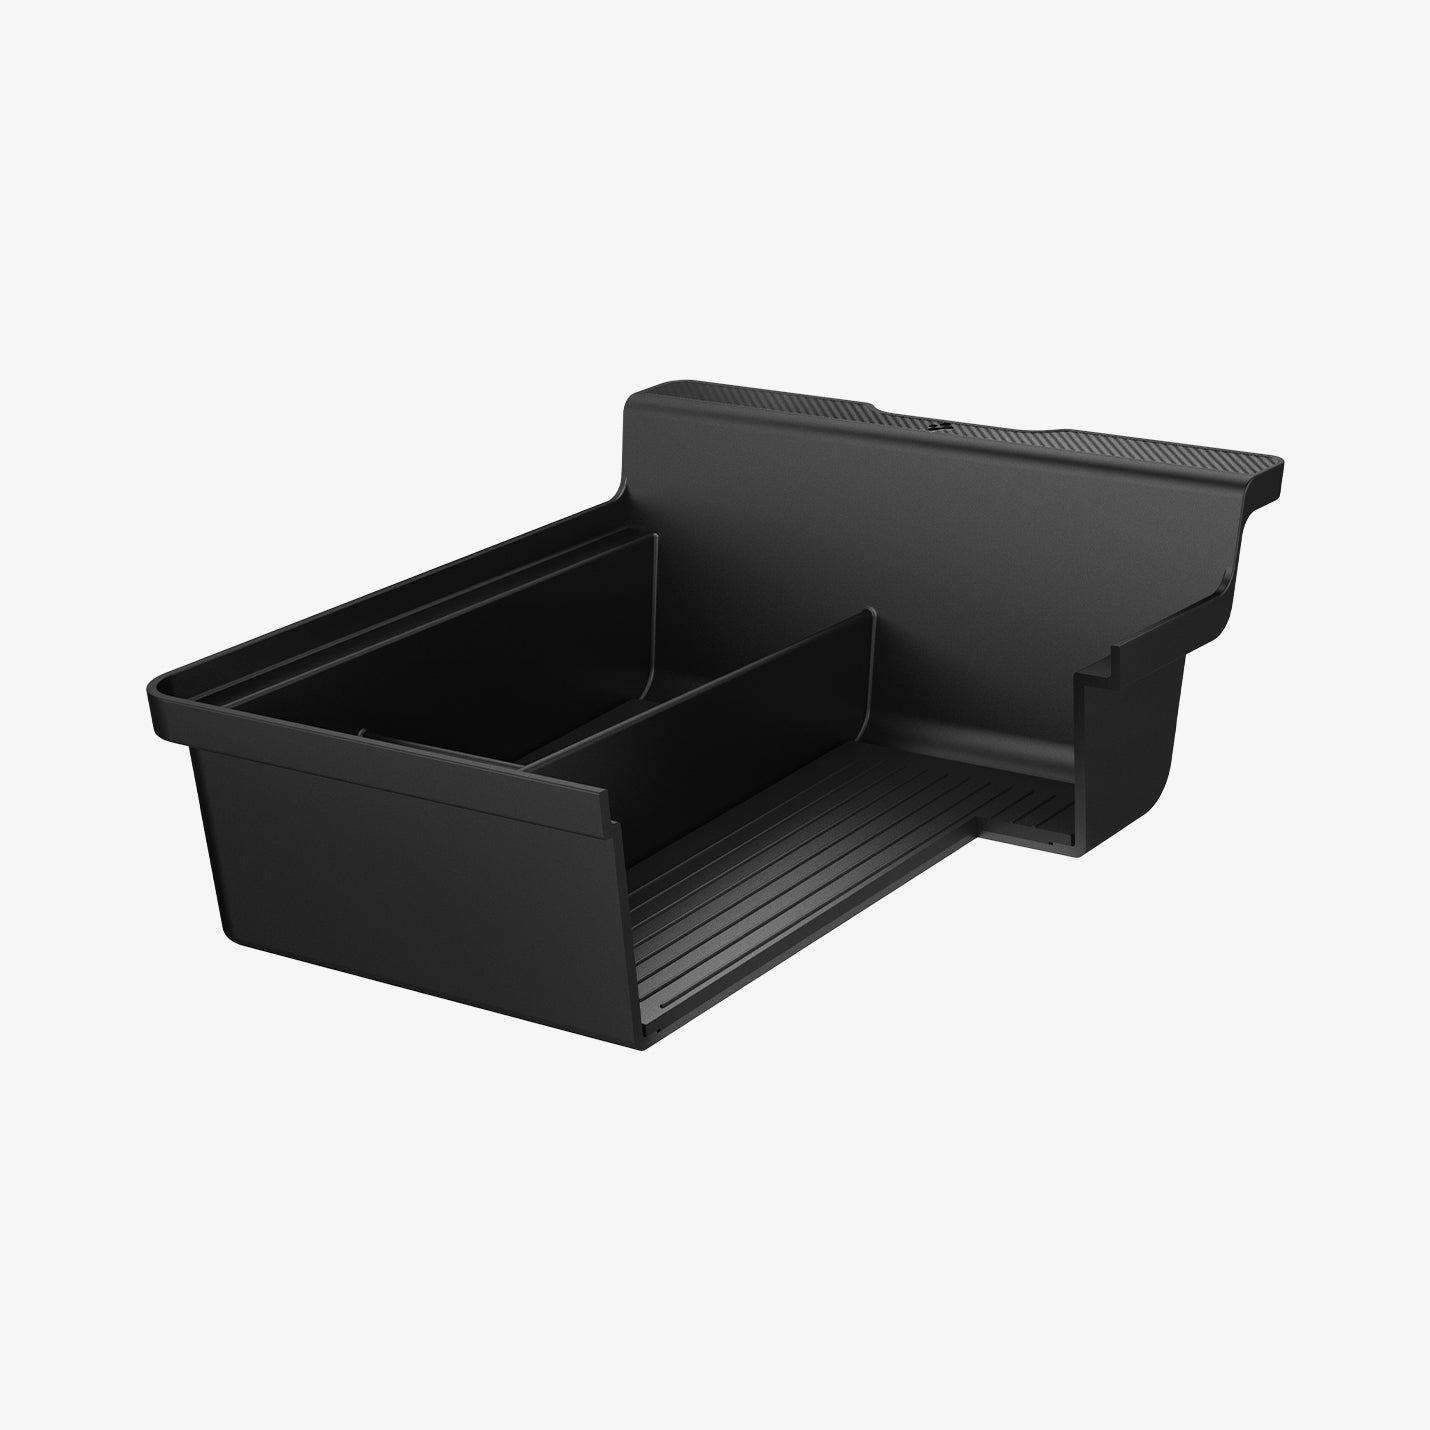 ACP04508 - Tesla Model y & 3 Center Console Organizer Tray in black showing the front and inside with tray cut open